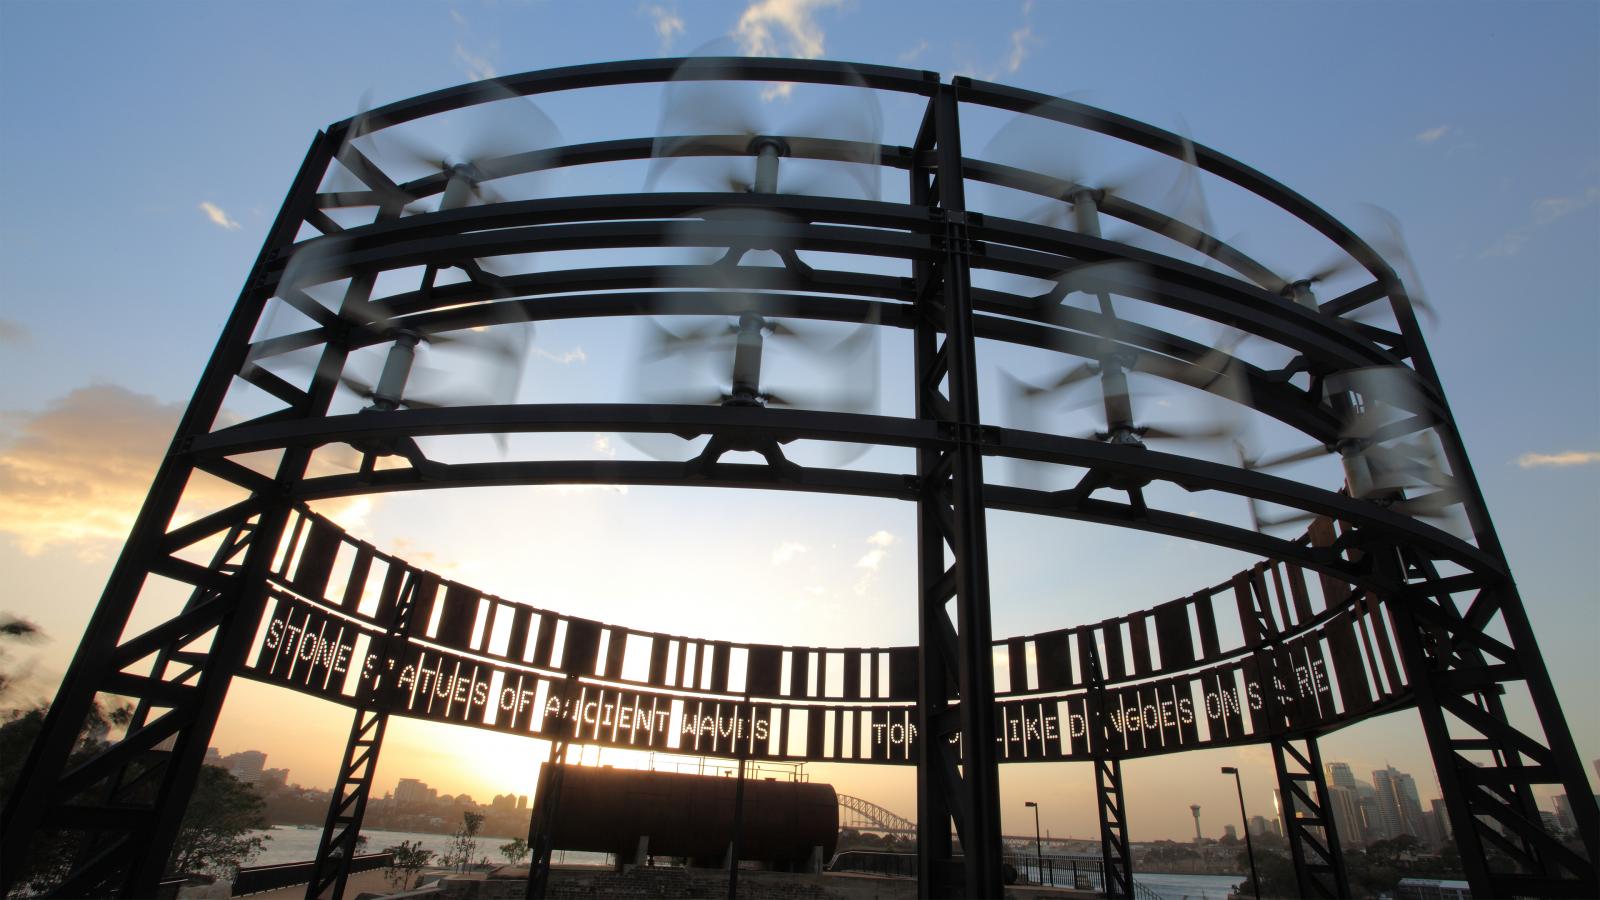 A circular kinetic light sculpture with spinning blades stands against a twilight sky in Ballast Point Park. The structure has multiple rows and appears to be in motion, creating a dynamic and captivating visual. The sun is setting in the background, casting a warm glow over the park.